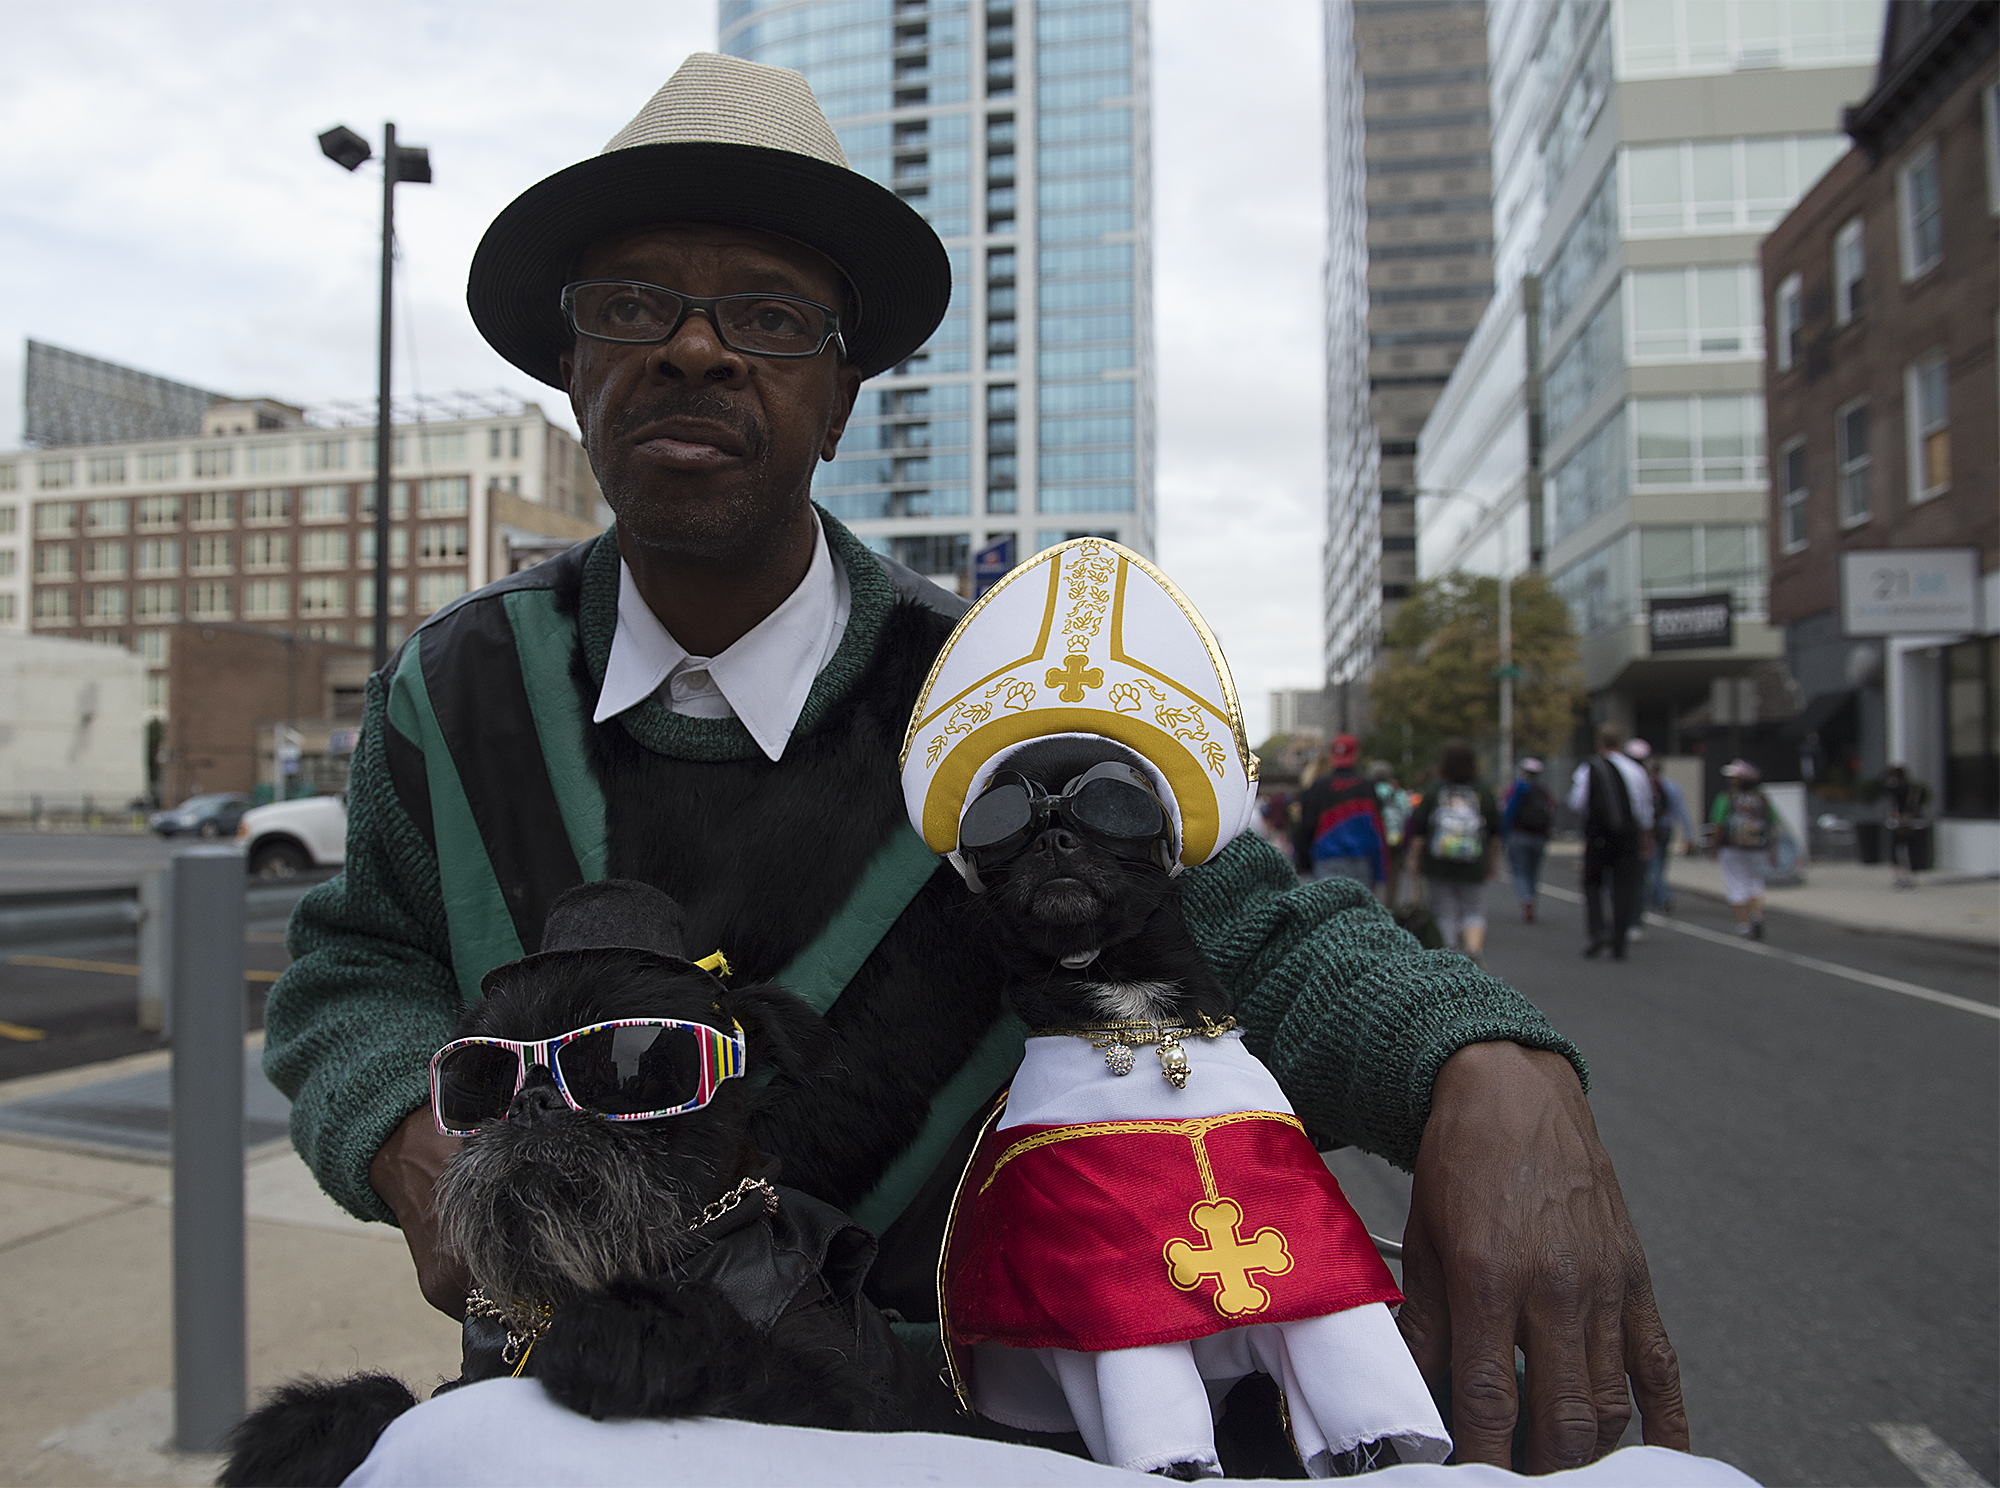  Philadelphia native Anthony Smith shows off his dogs Noodles and Diva on 21st street before Pope Francis held Mass on the Ben Franklin Parkway on September 27, 2015. 